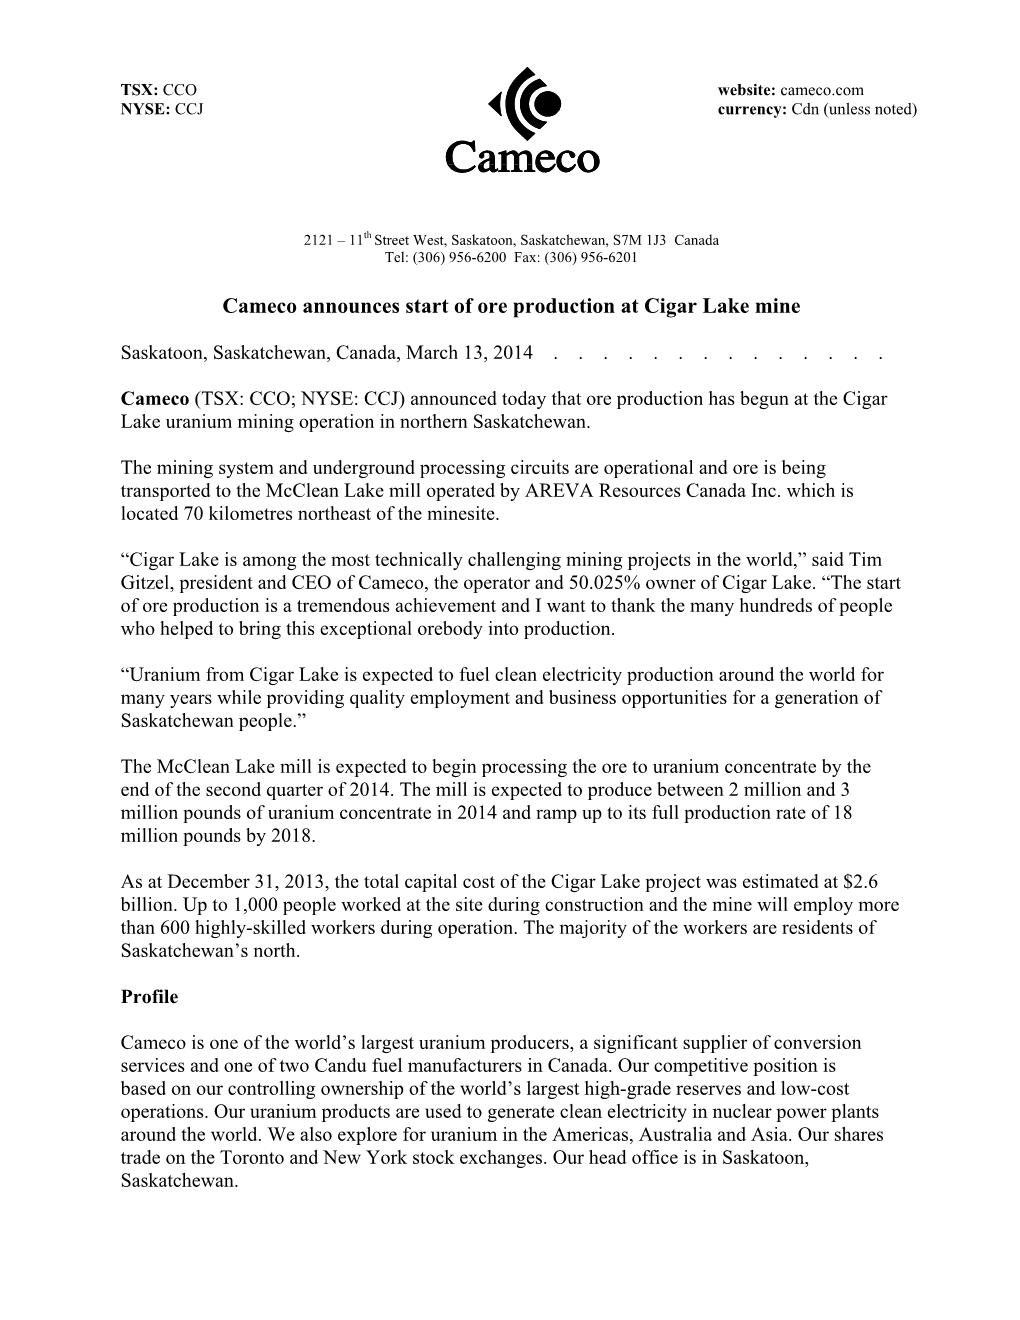 Cameco Announces Start of Ore Production at Cigar Lake Mine